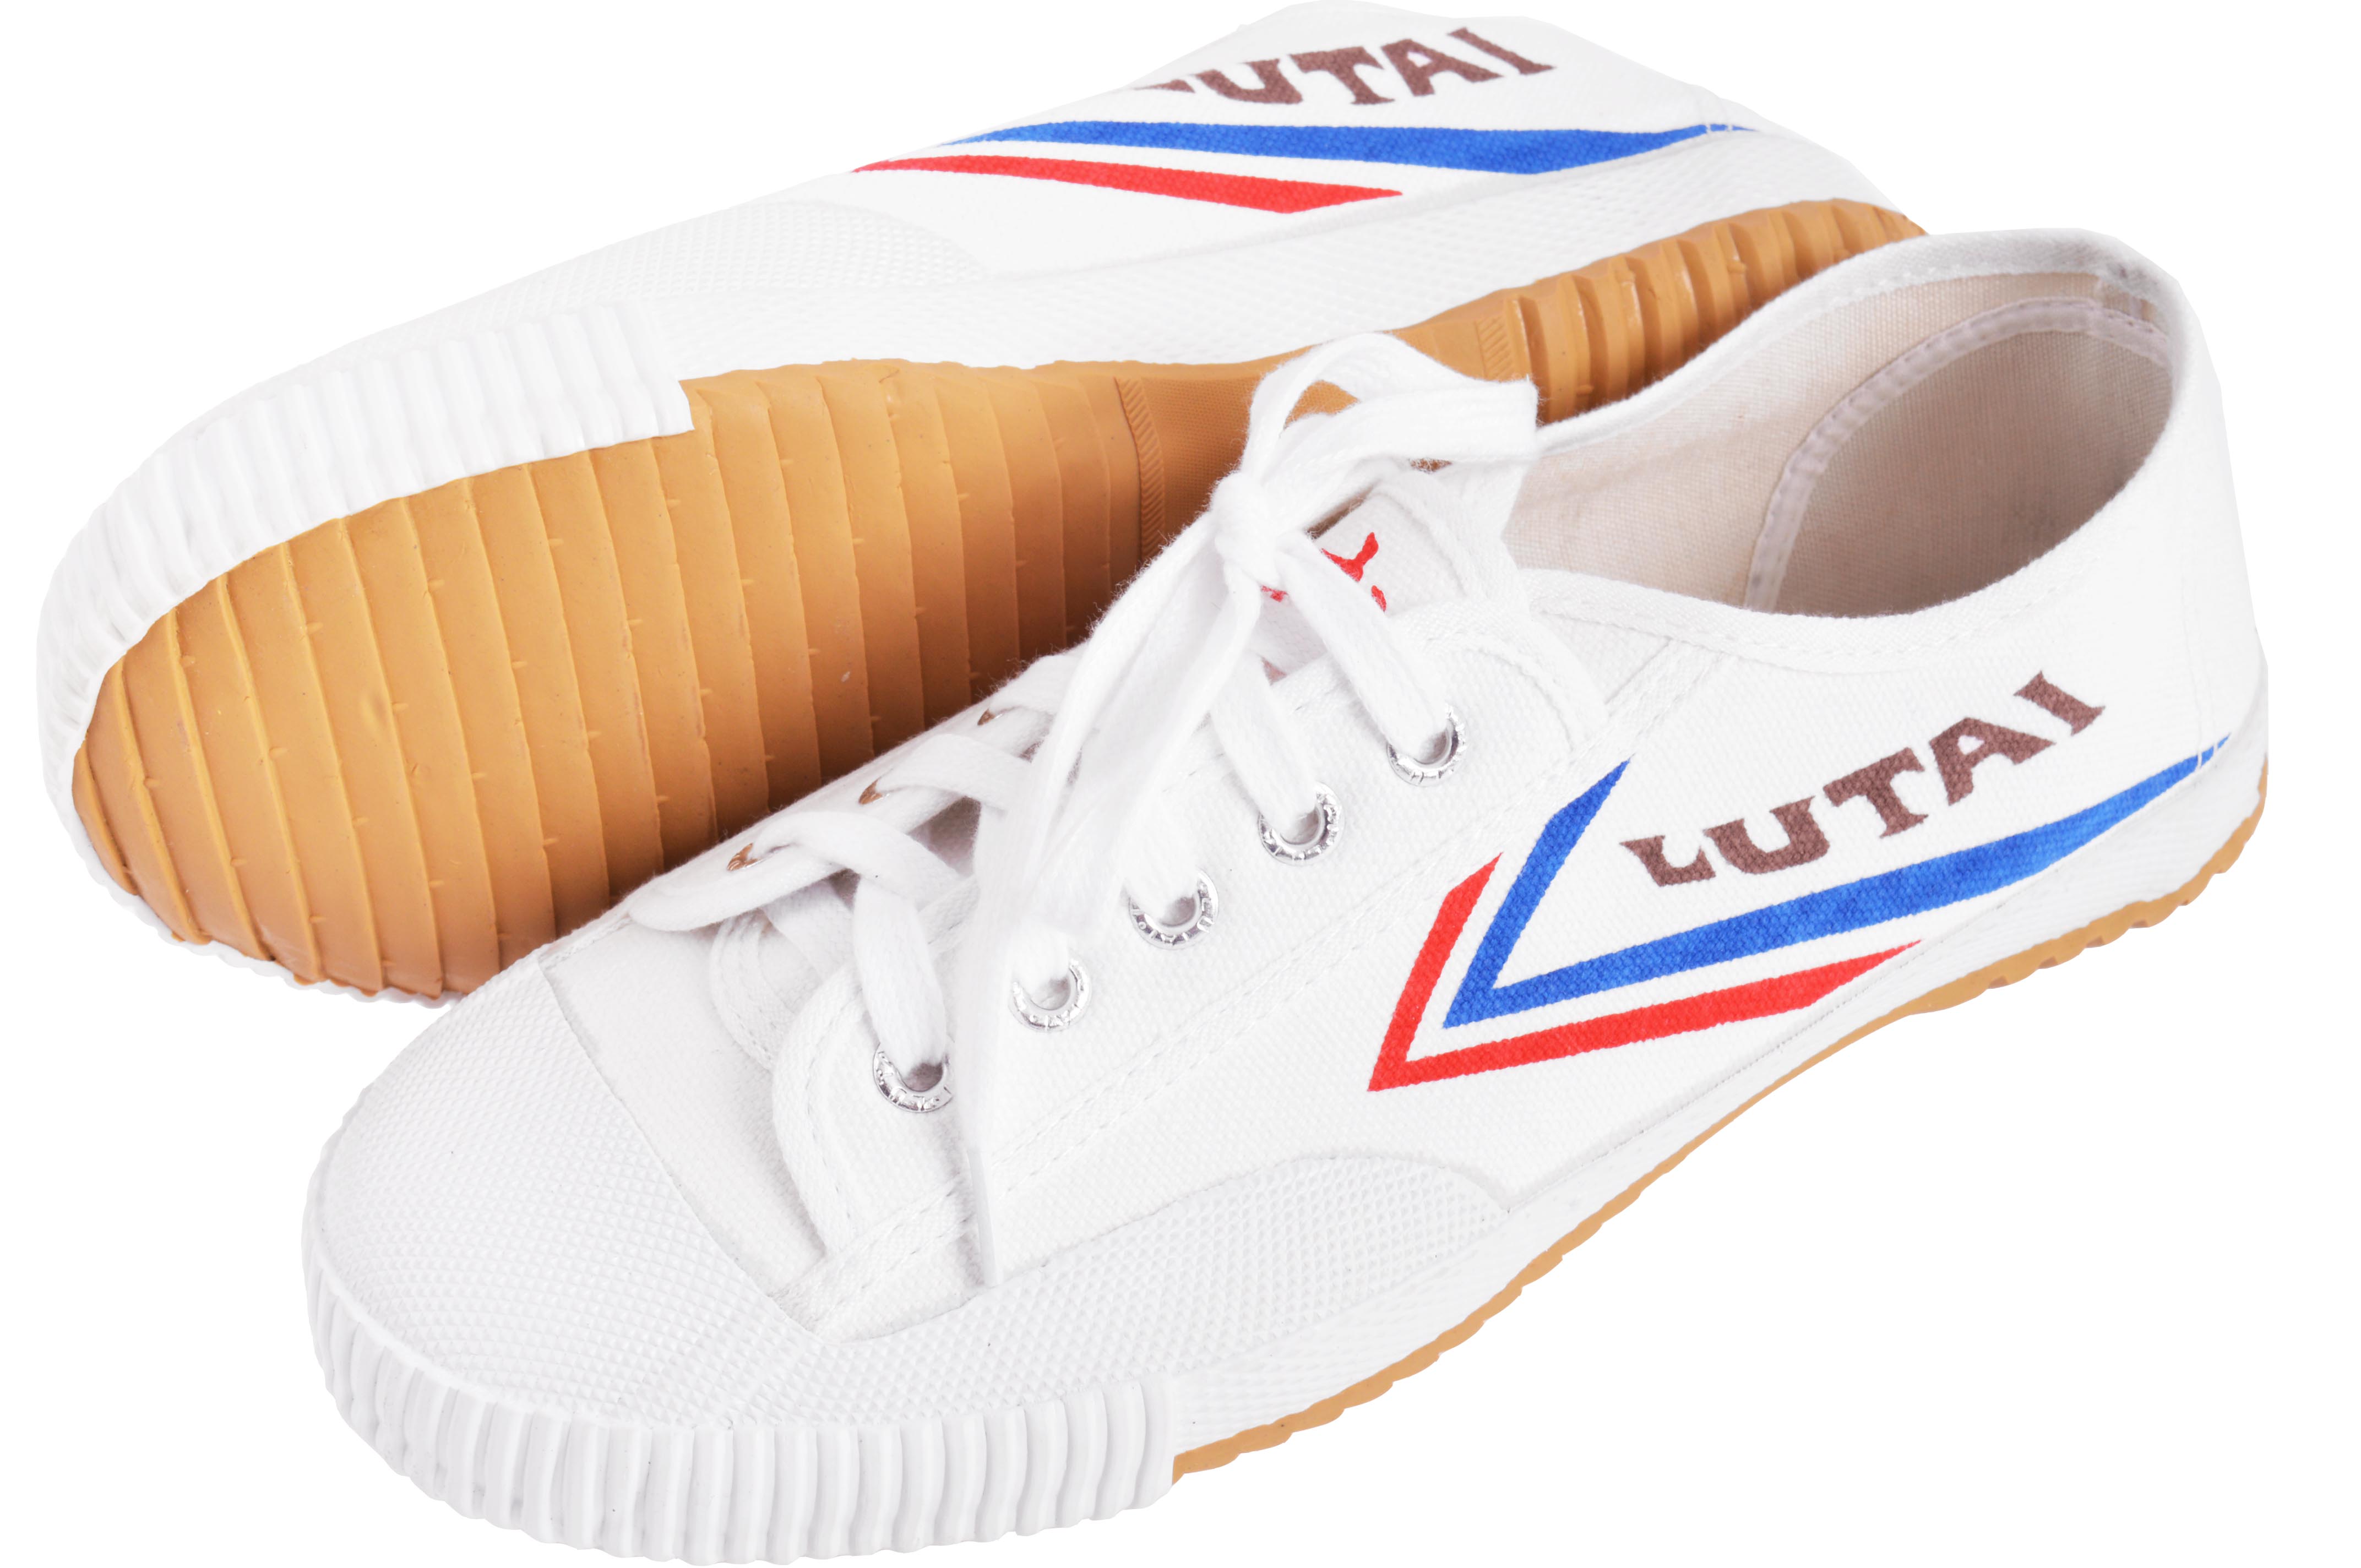 Chaussures Wushu Lutai, Noires